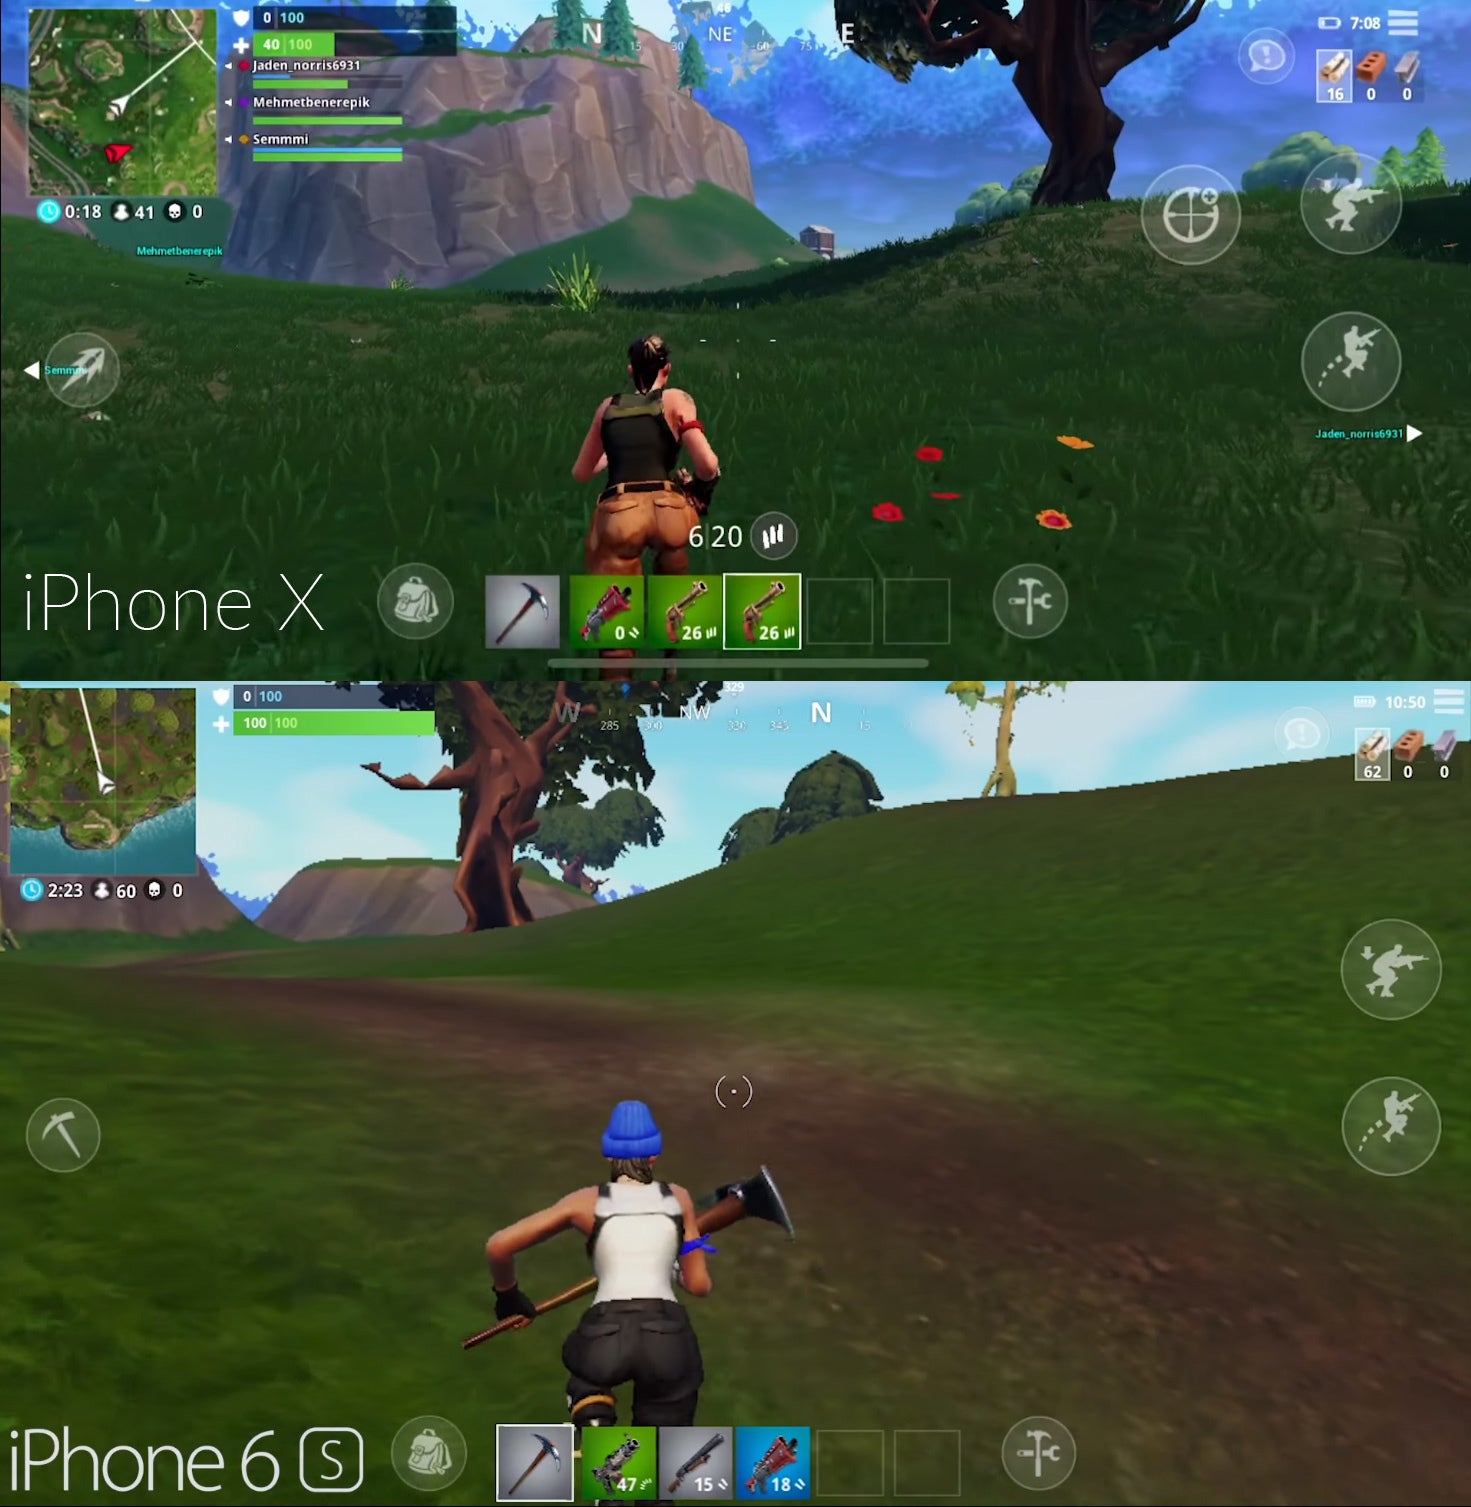 Fortnite on iPhone X vs iPhone 6s - Fortnite mobile compared to the home console and PC versions: What are the differences?